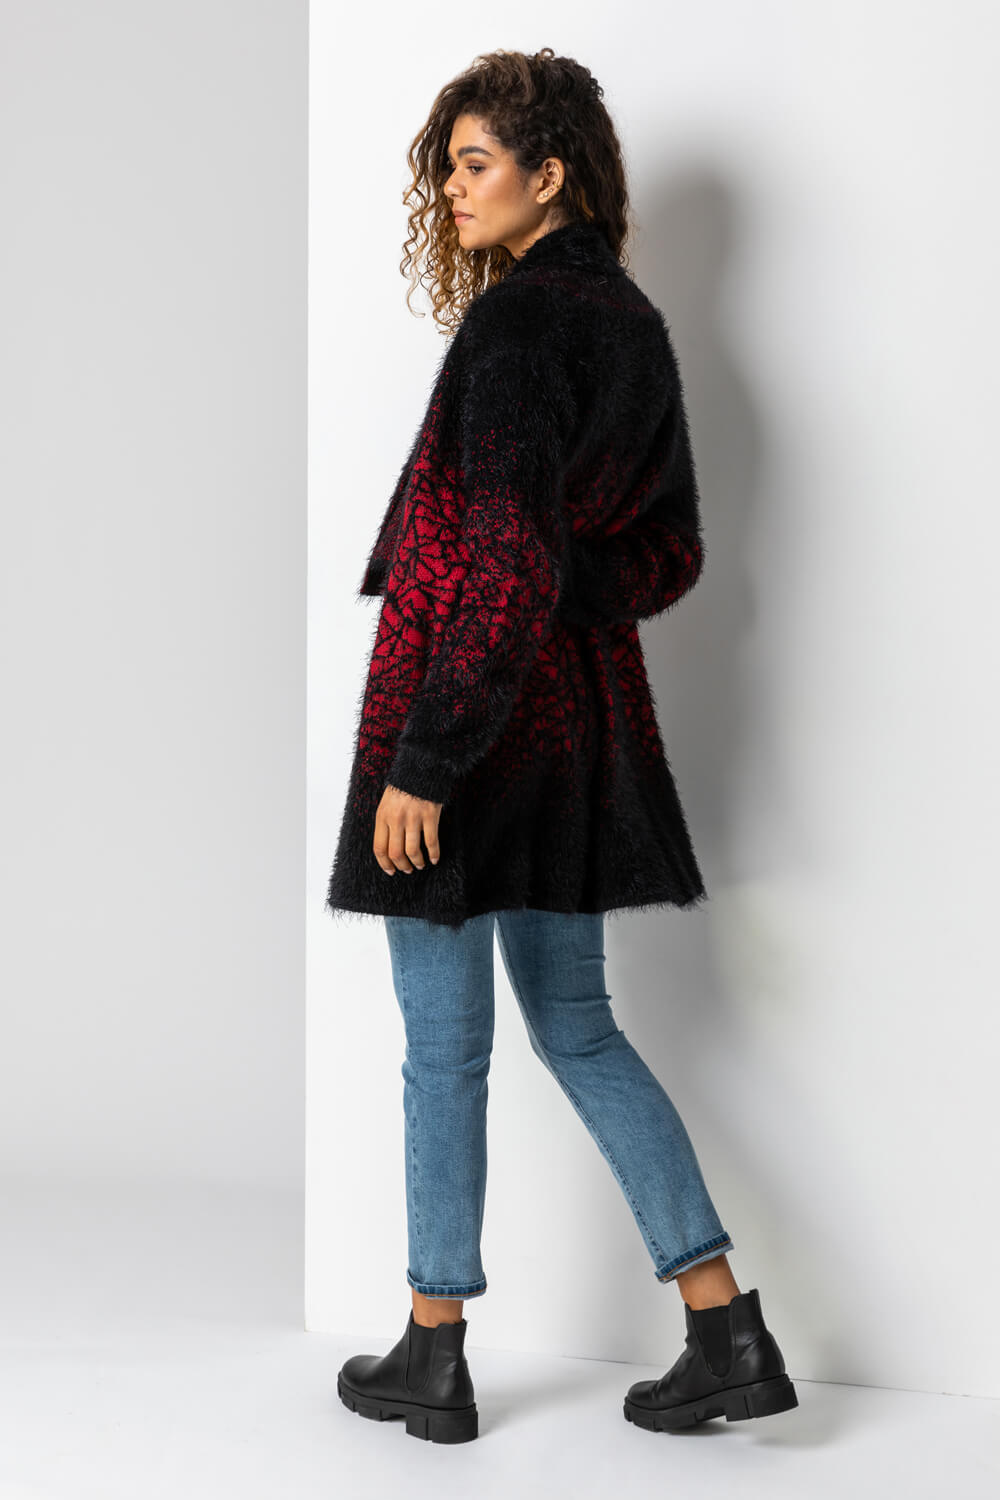 Red Mosaic Print Fluffy Cardigan, Image 2 of 4